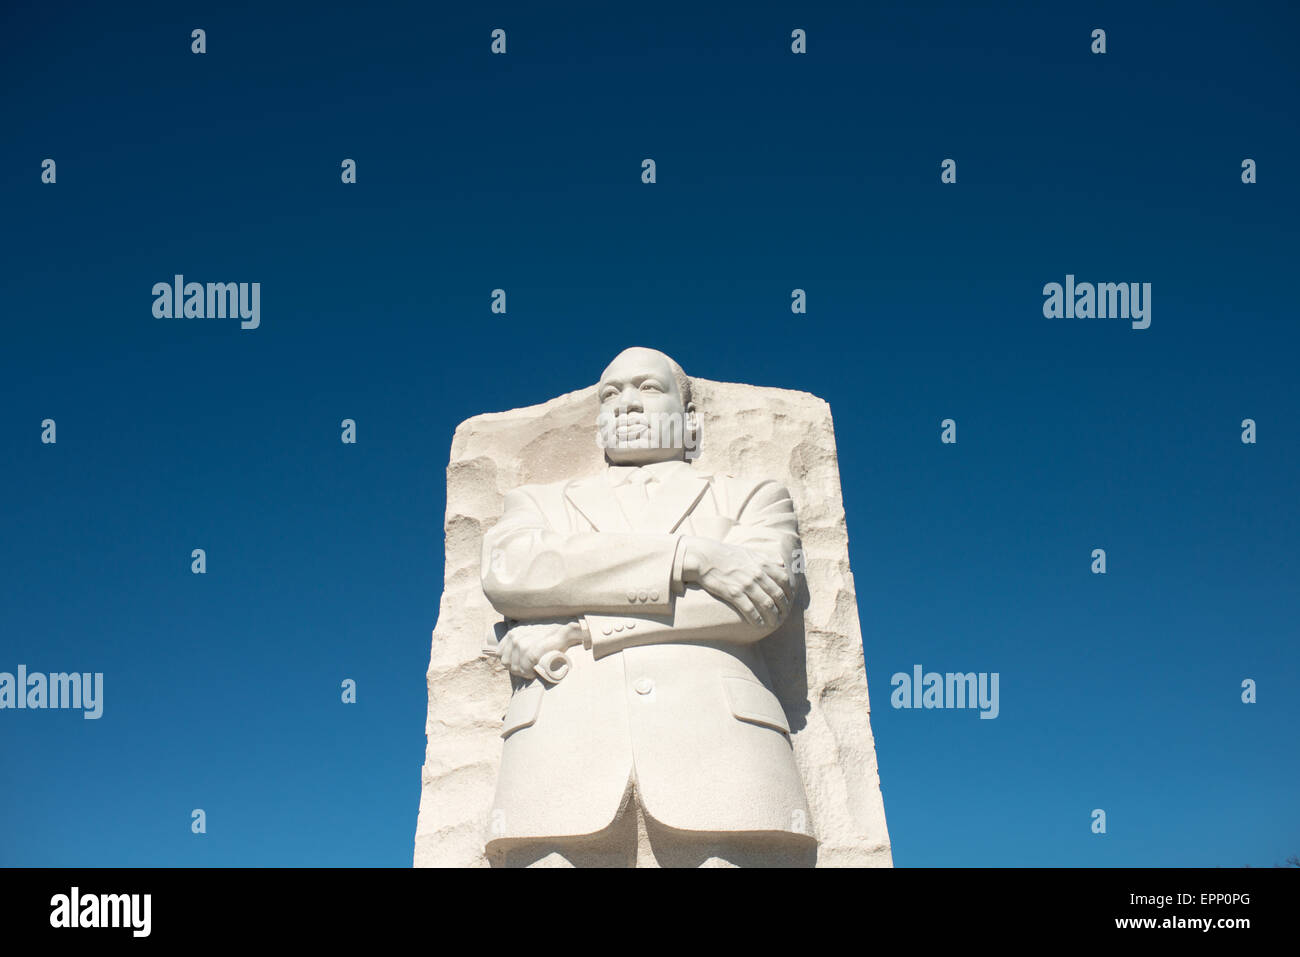 WASHINGTON DC, USA - The central statue at the heart of the memorial, sculpted by Lei Yixin. Opened in 2011, the Martin Luther King Jr Memorial sits on the banks of the Tidal Basin in Washington DC and commemorates the civil rights leader. Stock Photo